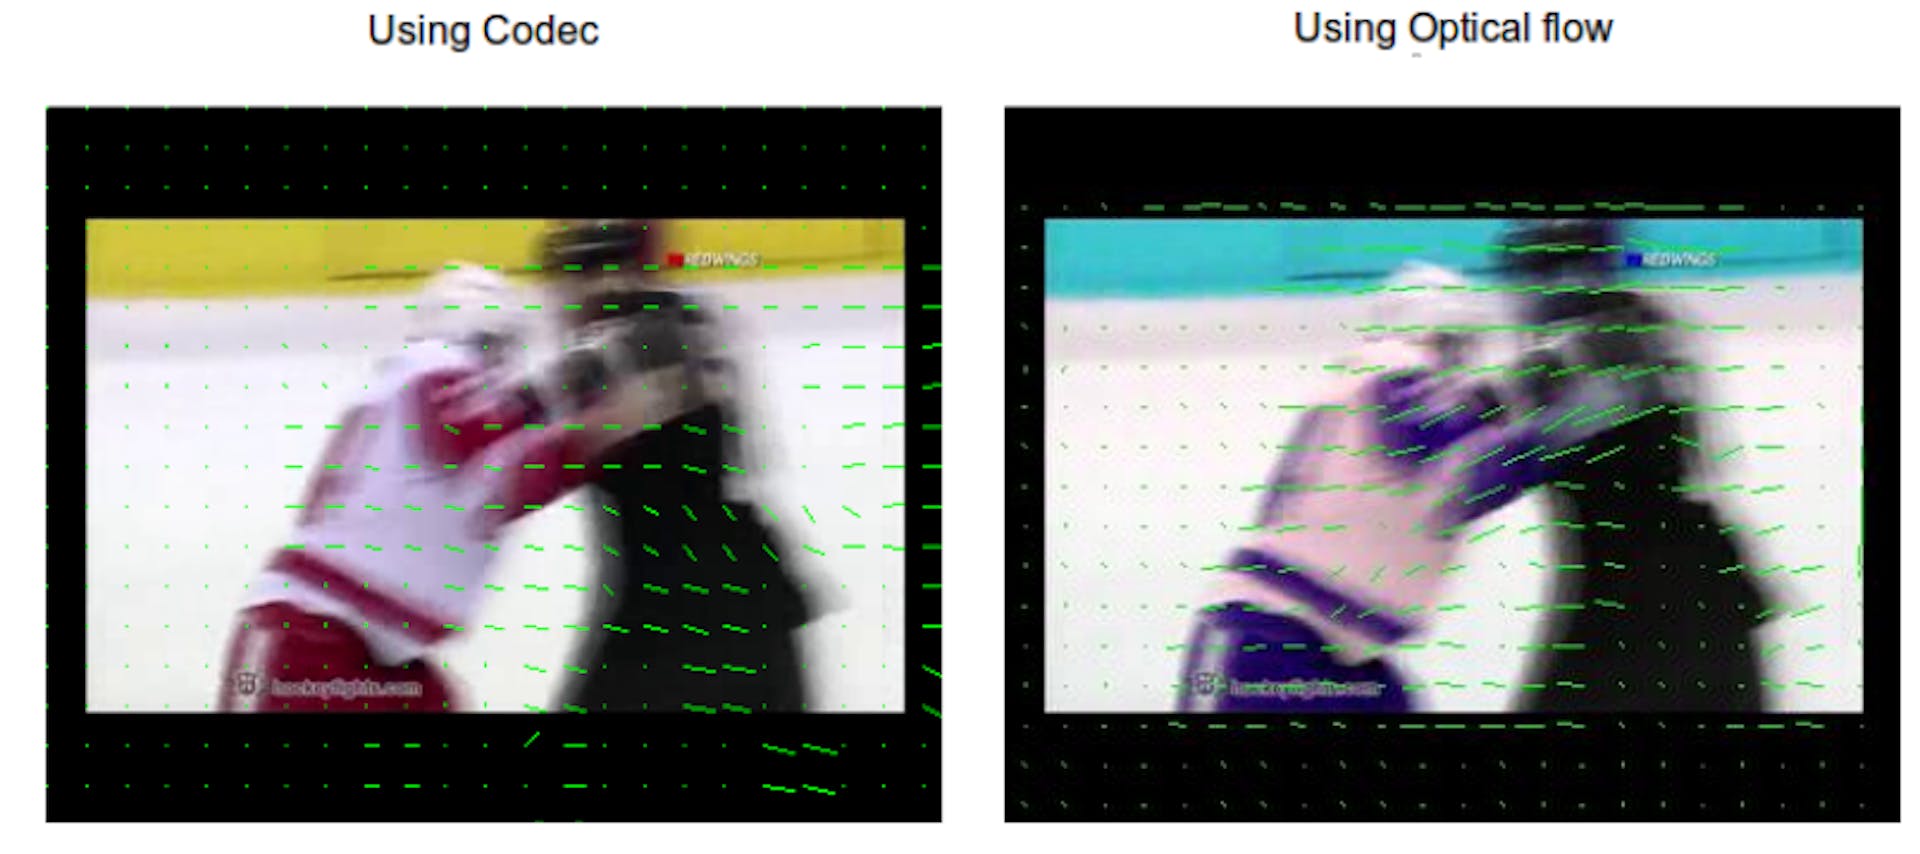 Figure 3.5: Motion information from frames extracted using codec vs using optical flow.